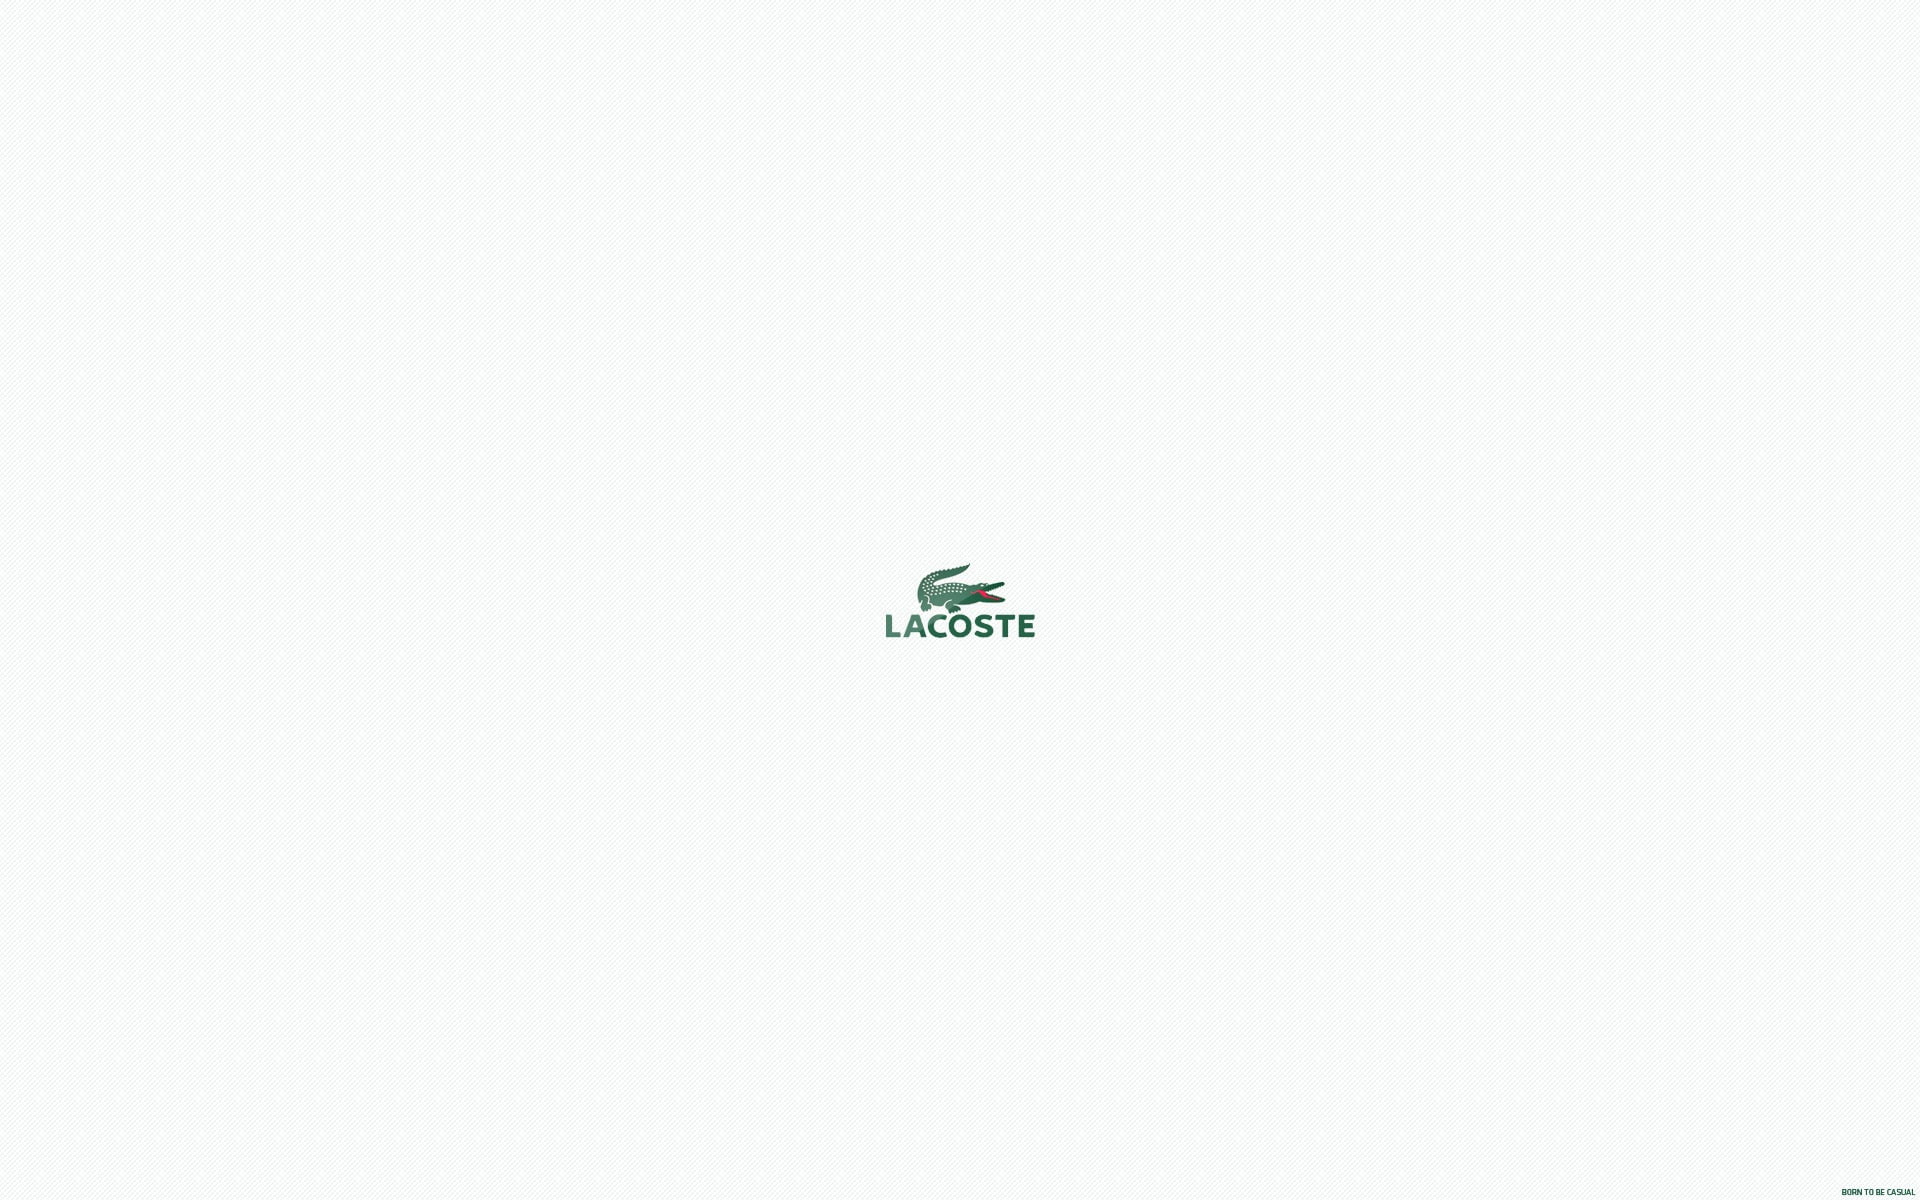 Wallpaper Lacoste Copy Space Text Wallpaper For You